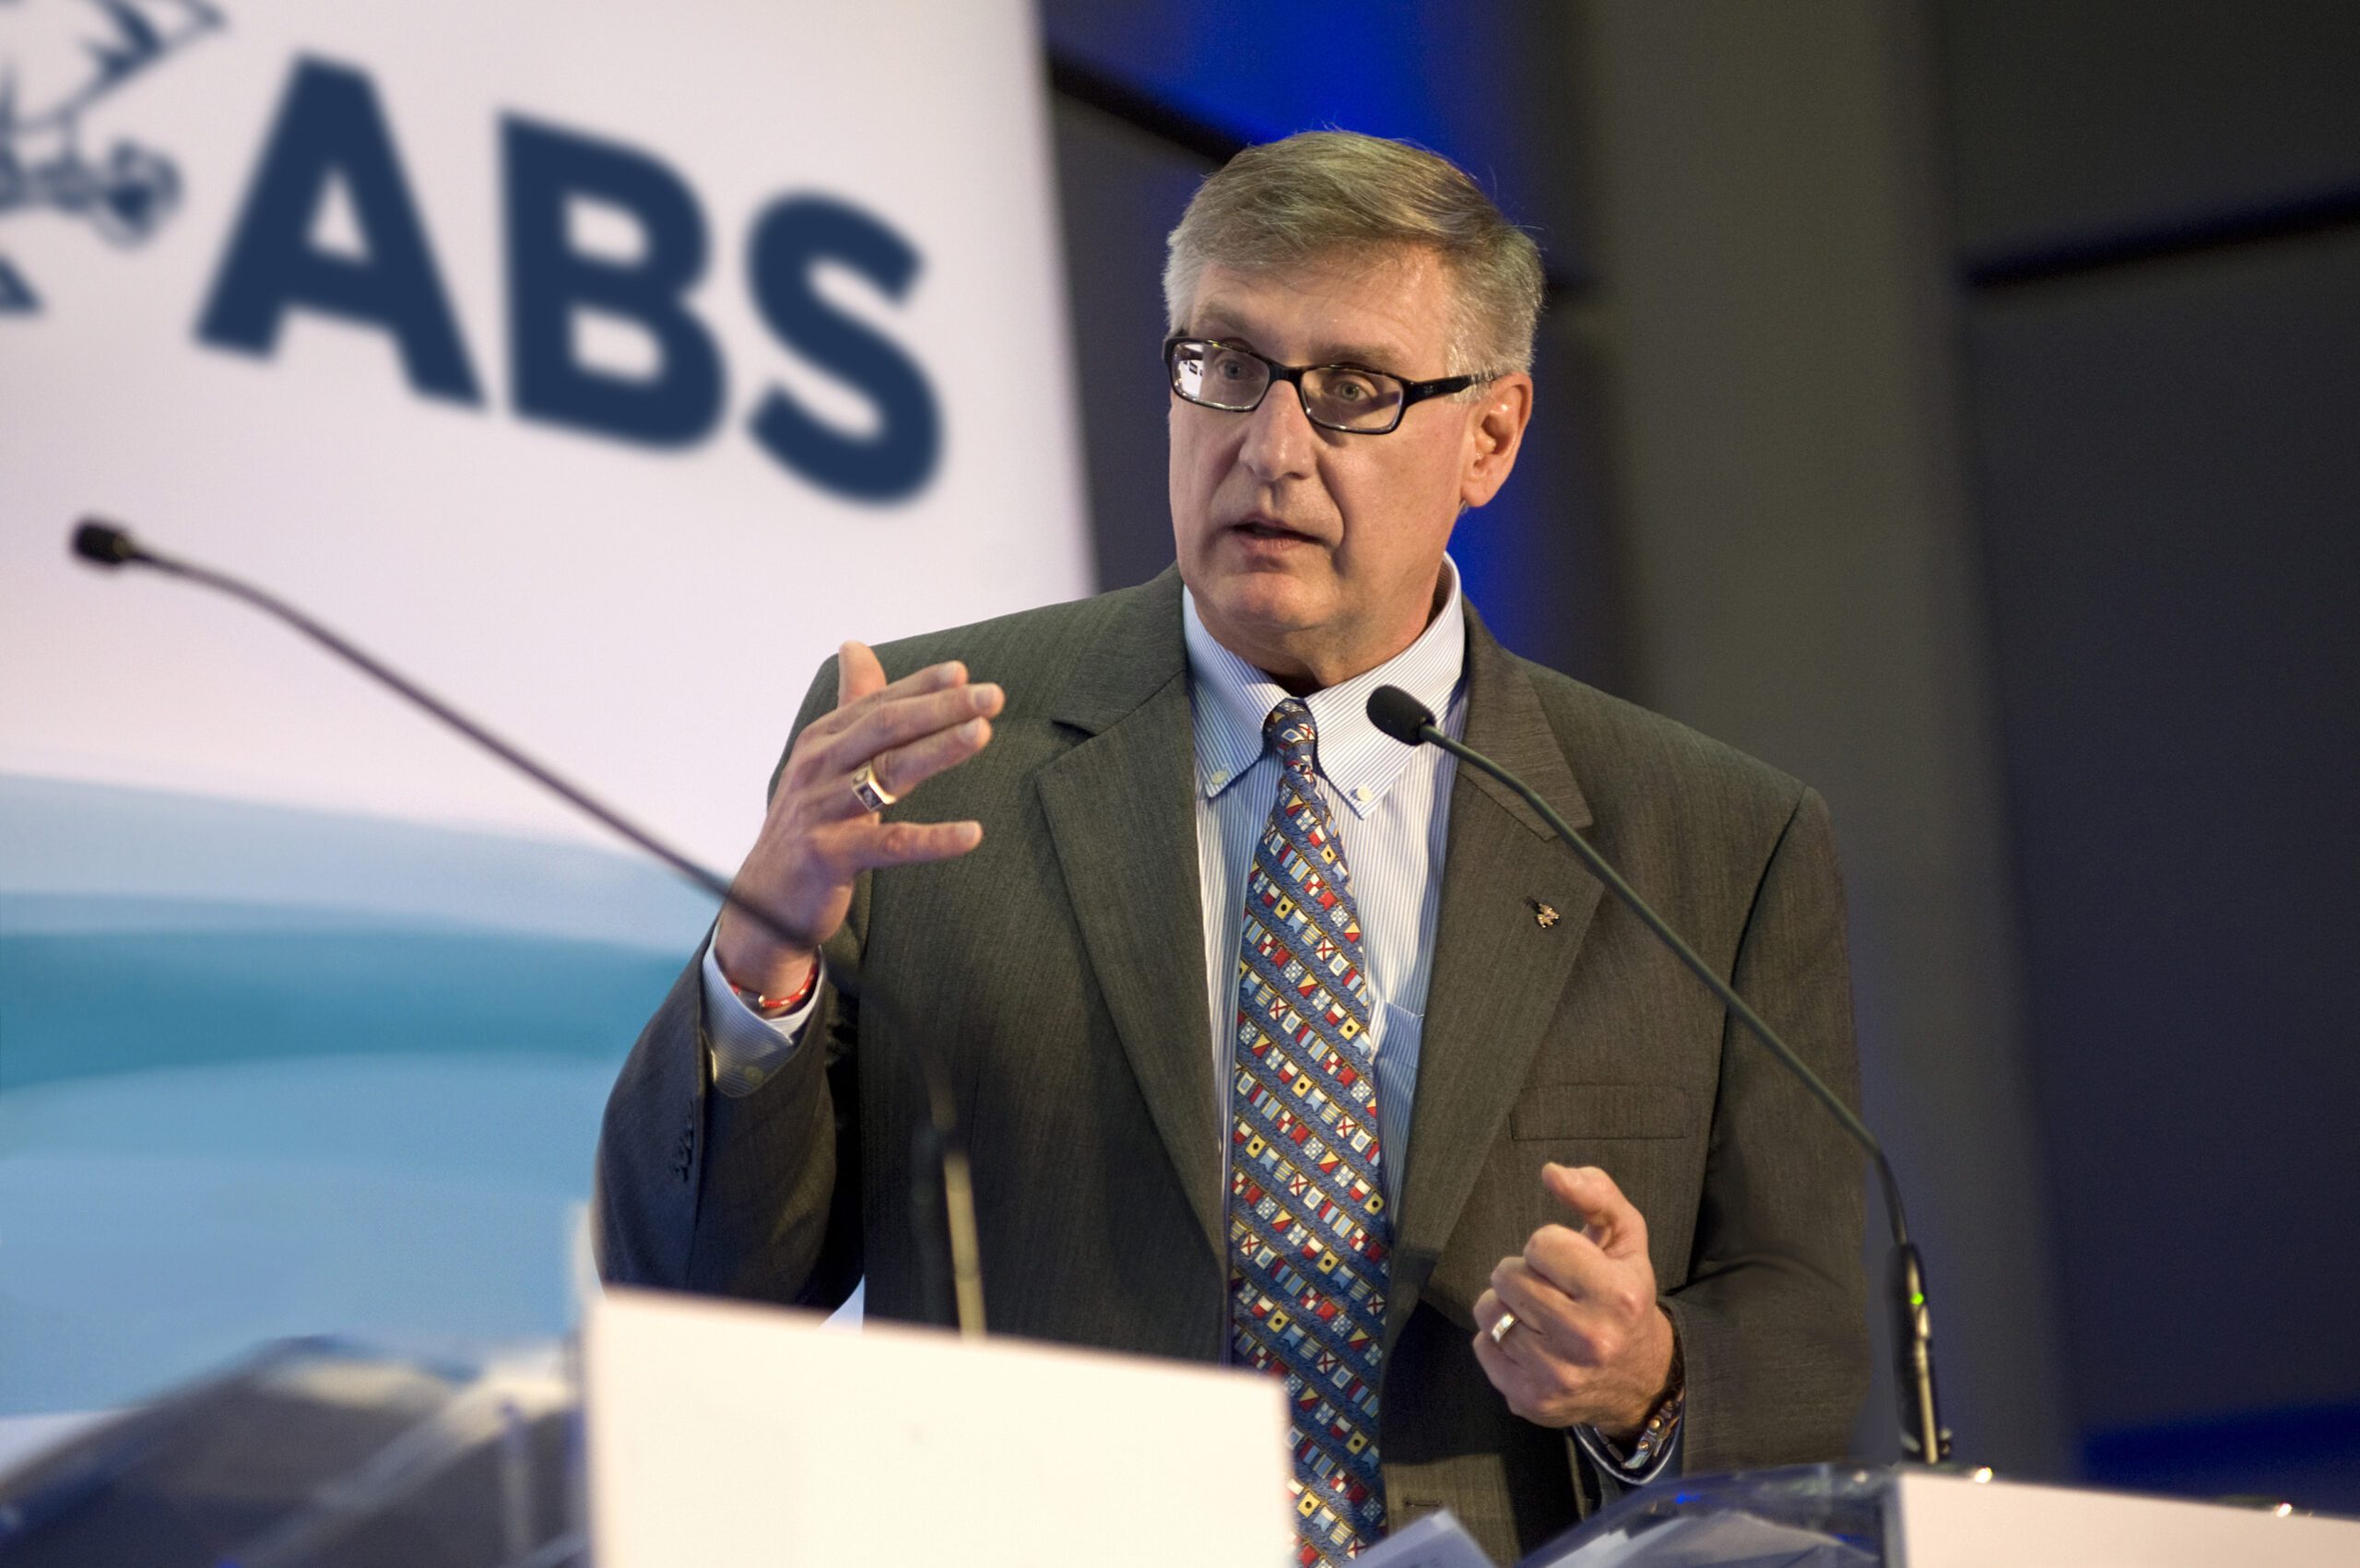 ABS Chairman, President and CEO Tells Energy Industry Shipping is the Vehicle for the Clean Energy Transition